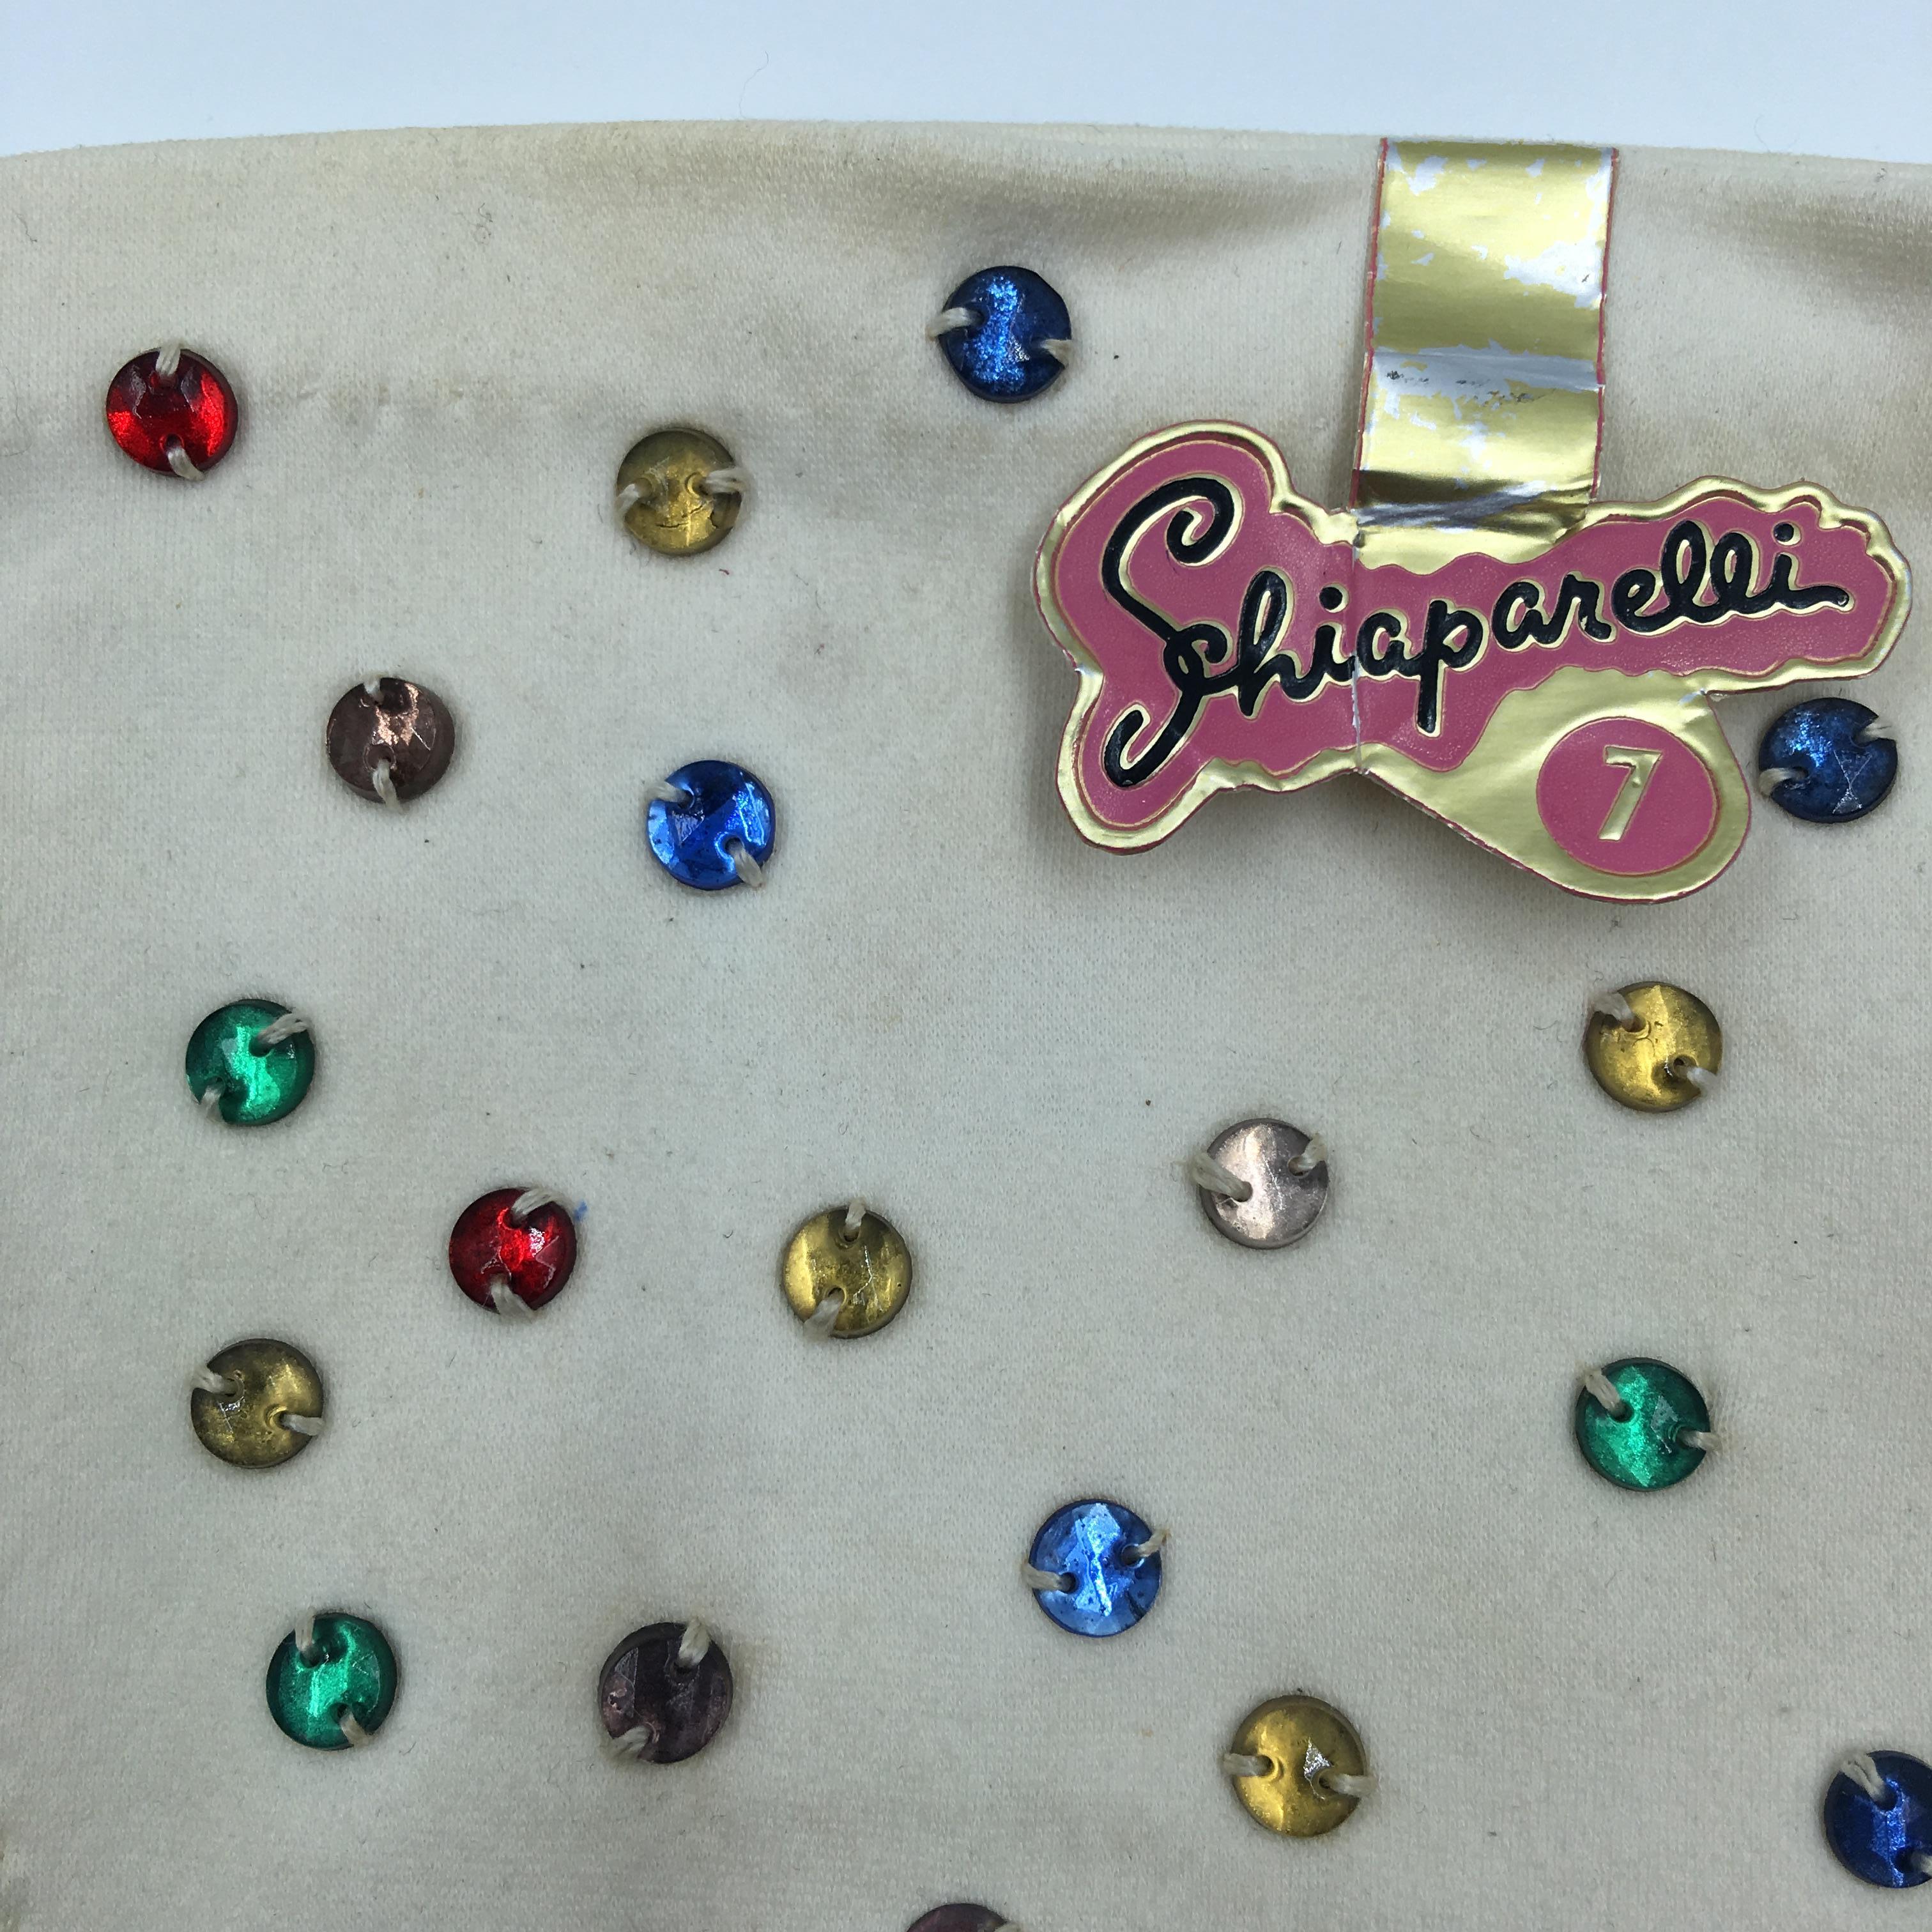 Schiaparelli, by Fownes, Cream Gloves with Hand Sewn Multi Color Beaded Rhinestones. Original paper Schiaparelli tag still on. Glove size 7. Normal vintage wear on the gloves from age and handling. See photos. 
Photo #5 shows a dark tan mark. Photo